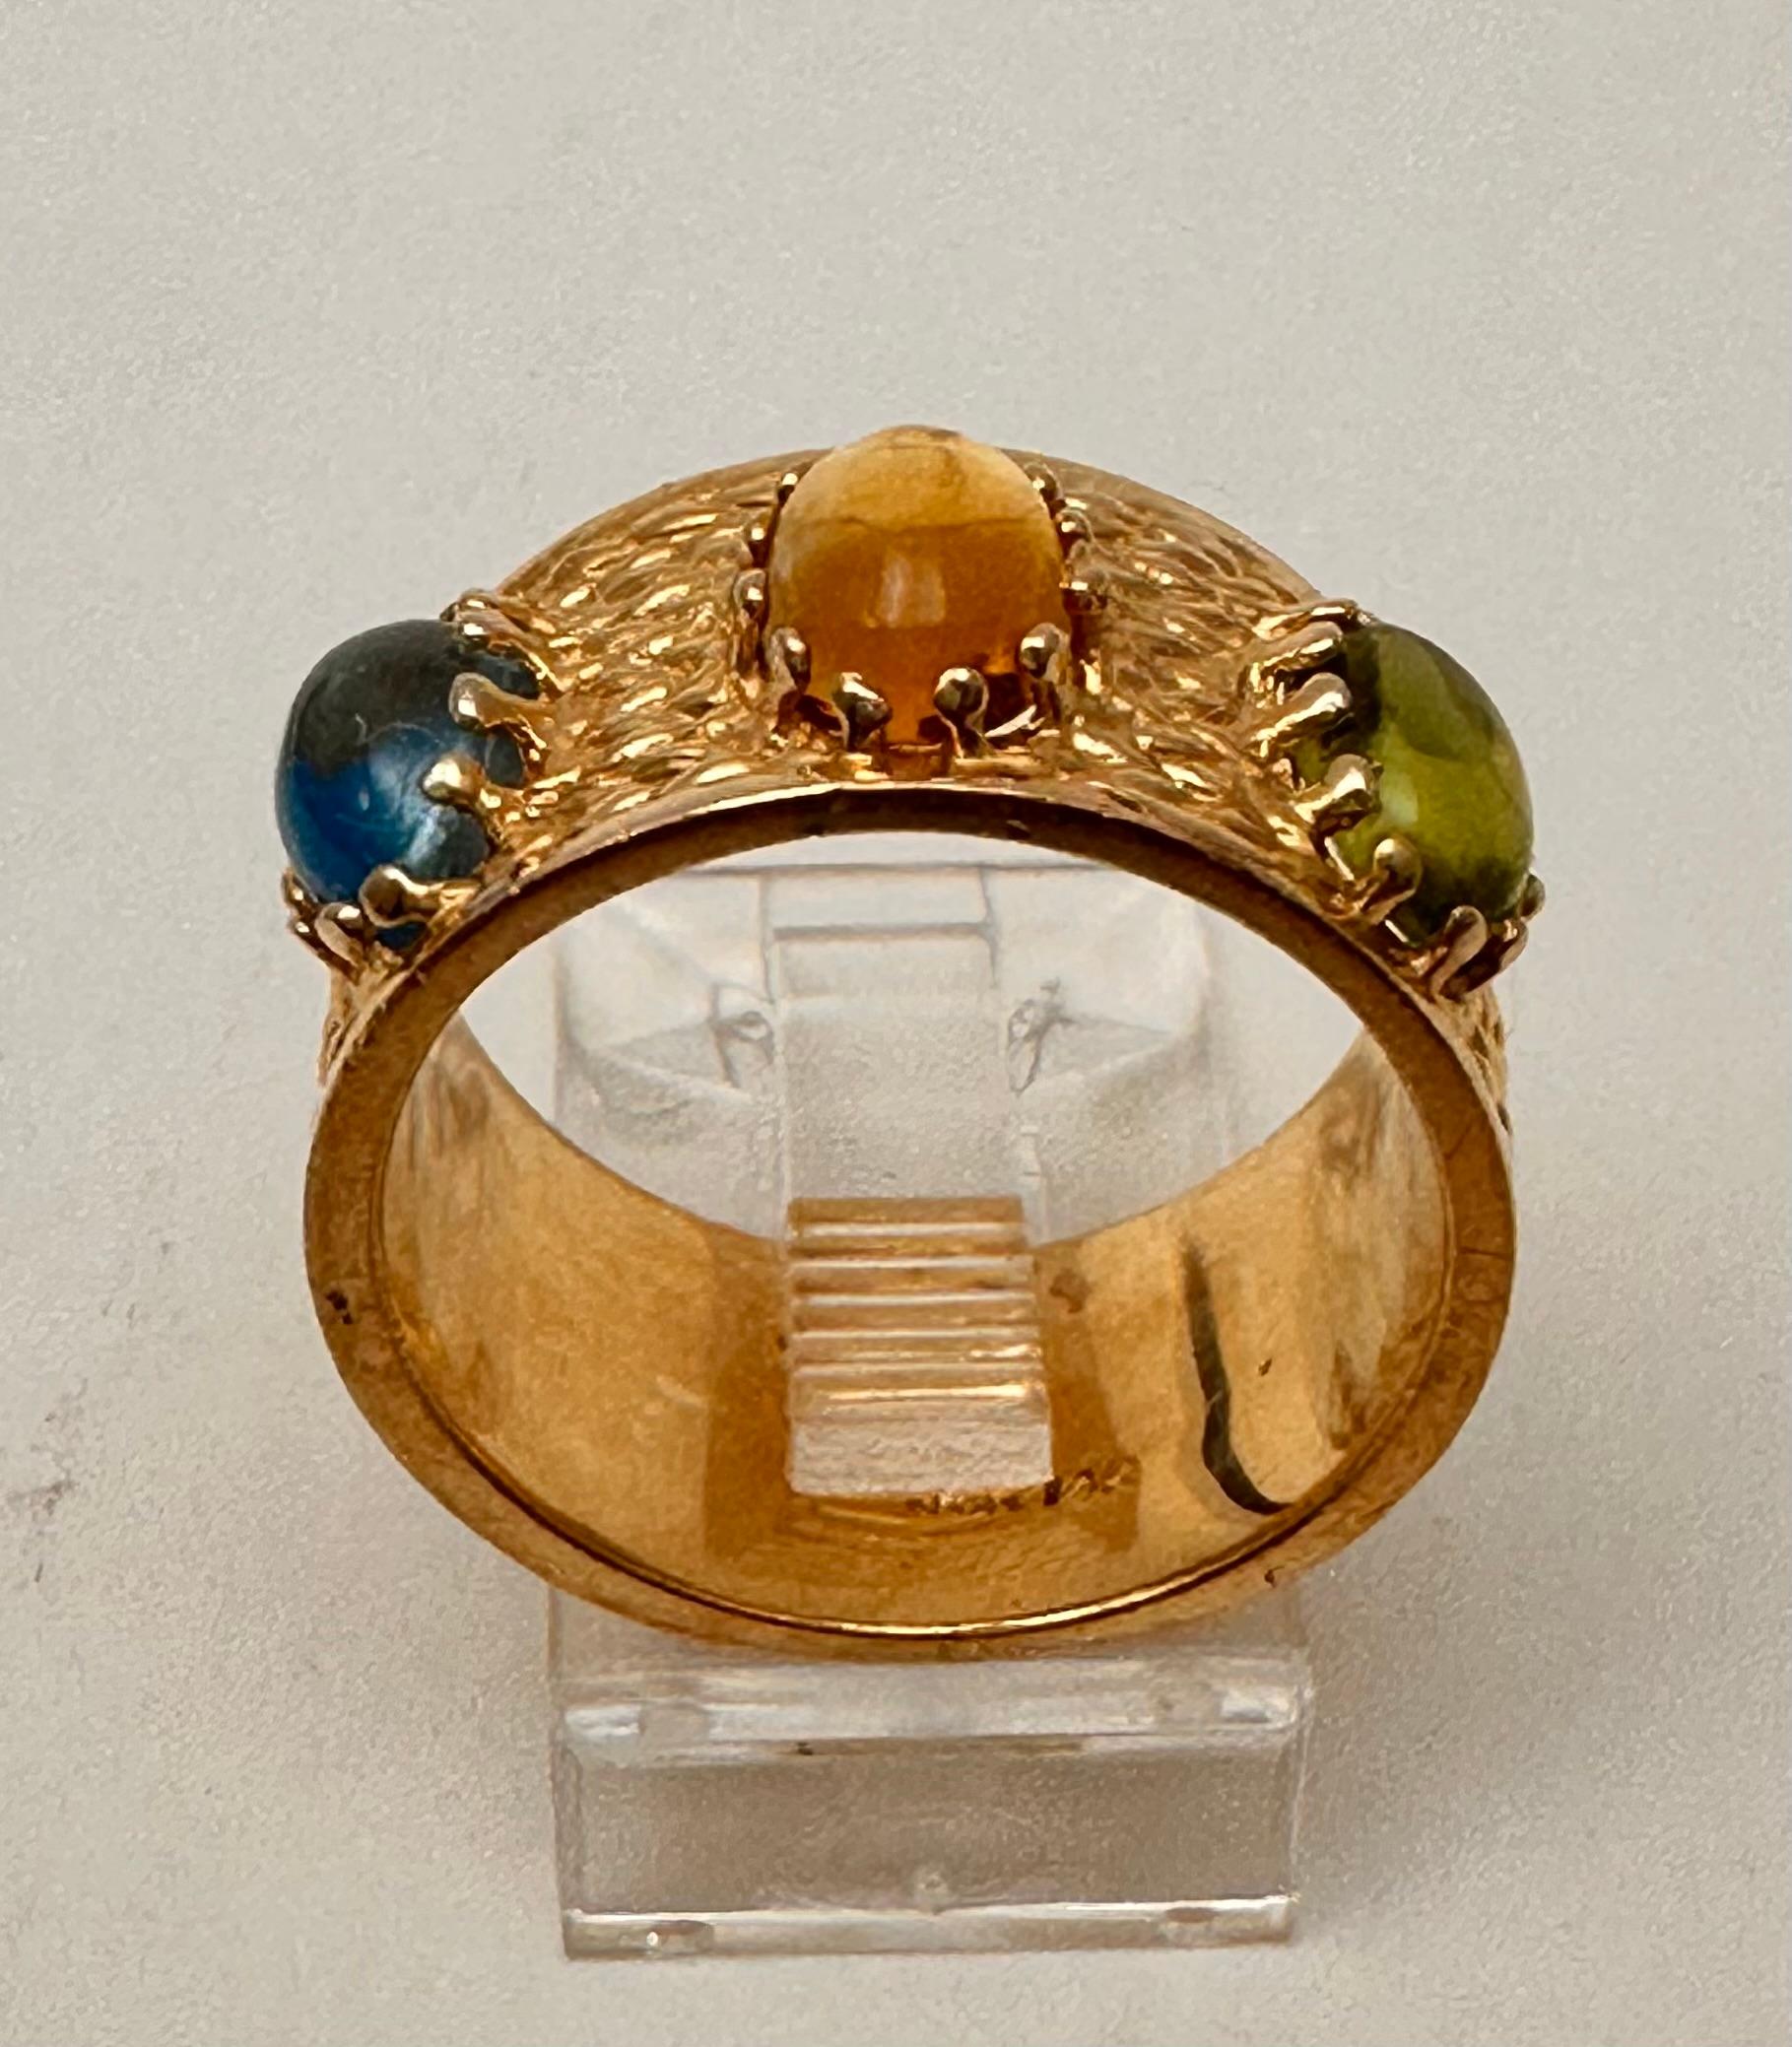 Oval Cut 14k Yellow Gold 5mm x 7mm Blue Topaz Citrine Peridot Cabochon Ring Sz 7 1/4 For Sale